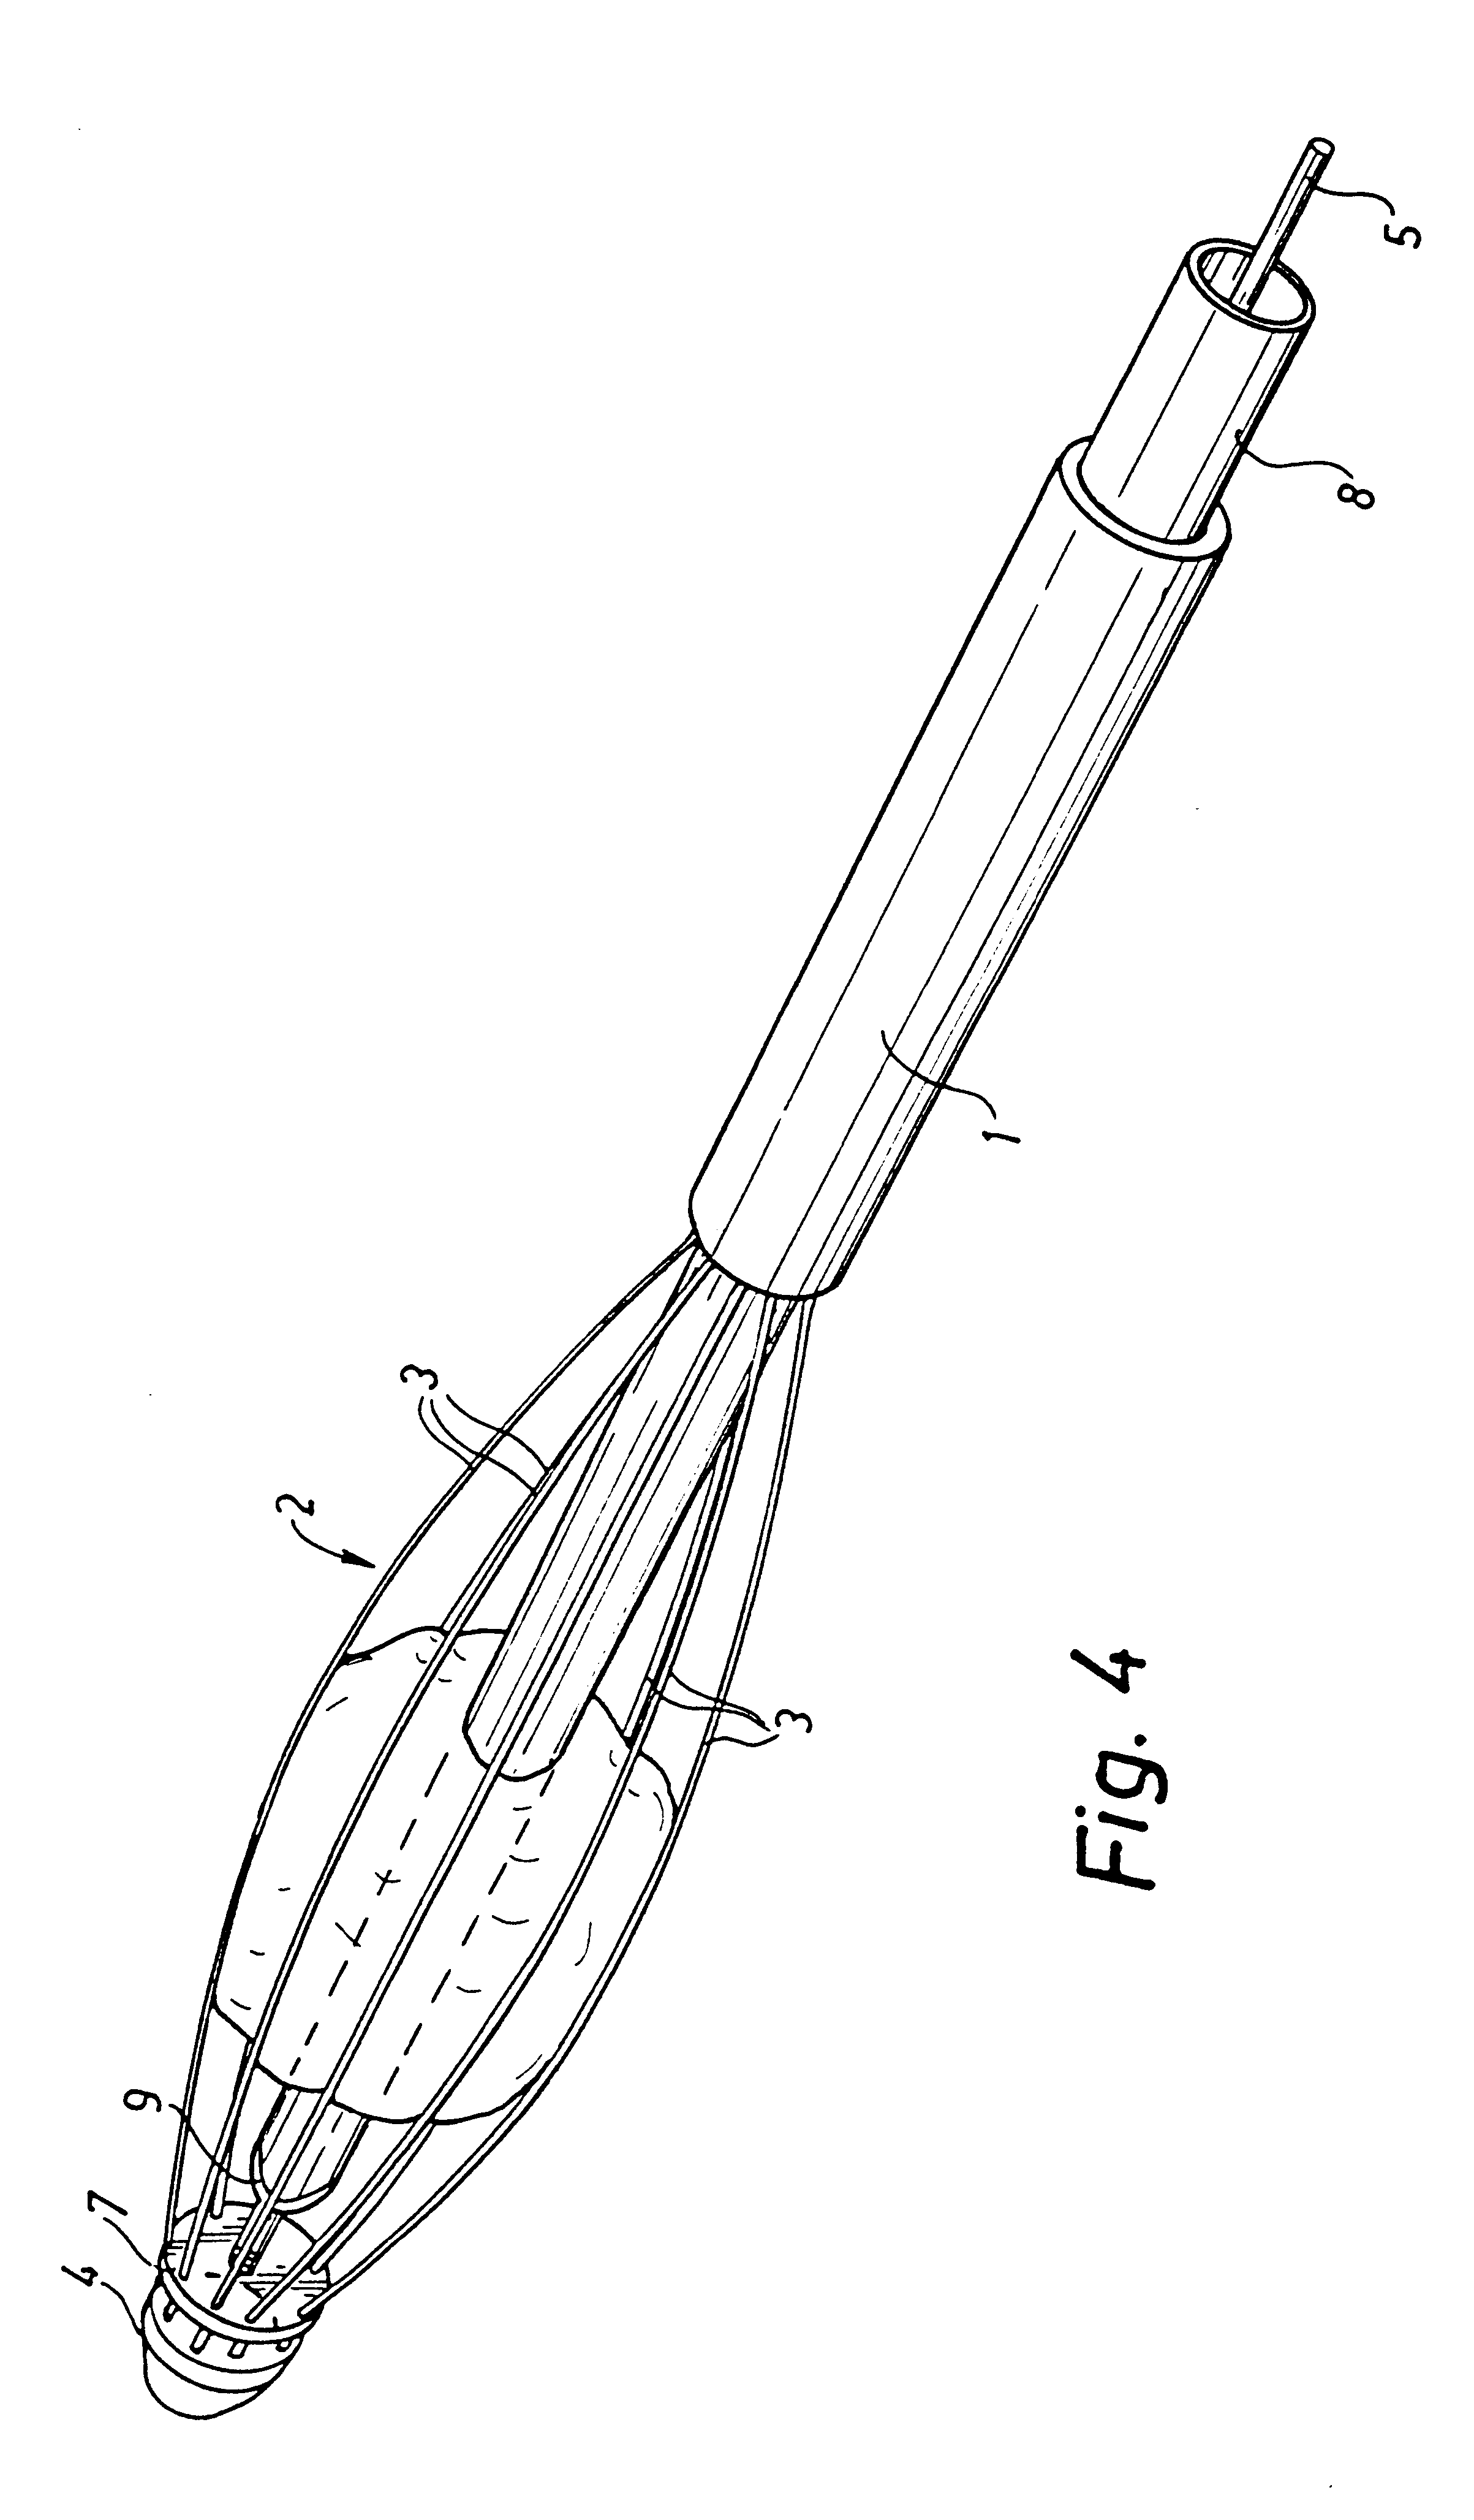 Device for extraction of tissue or the like